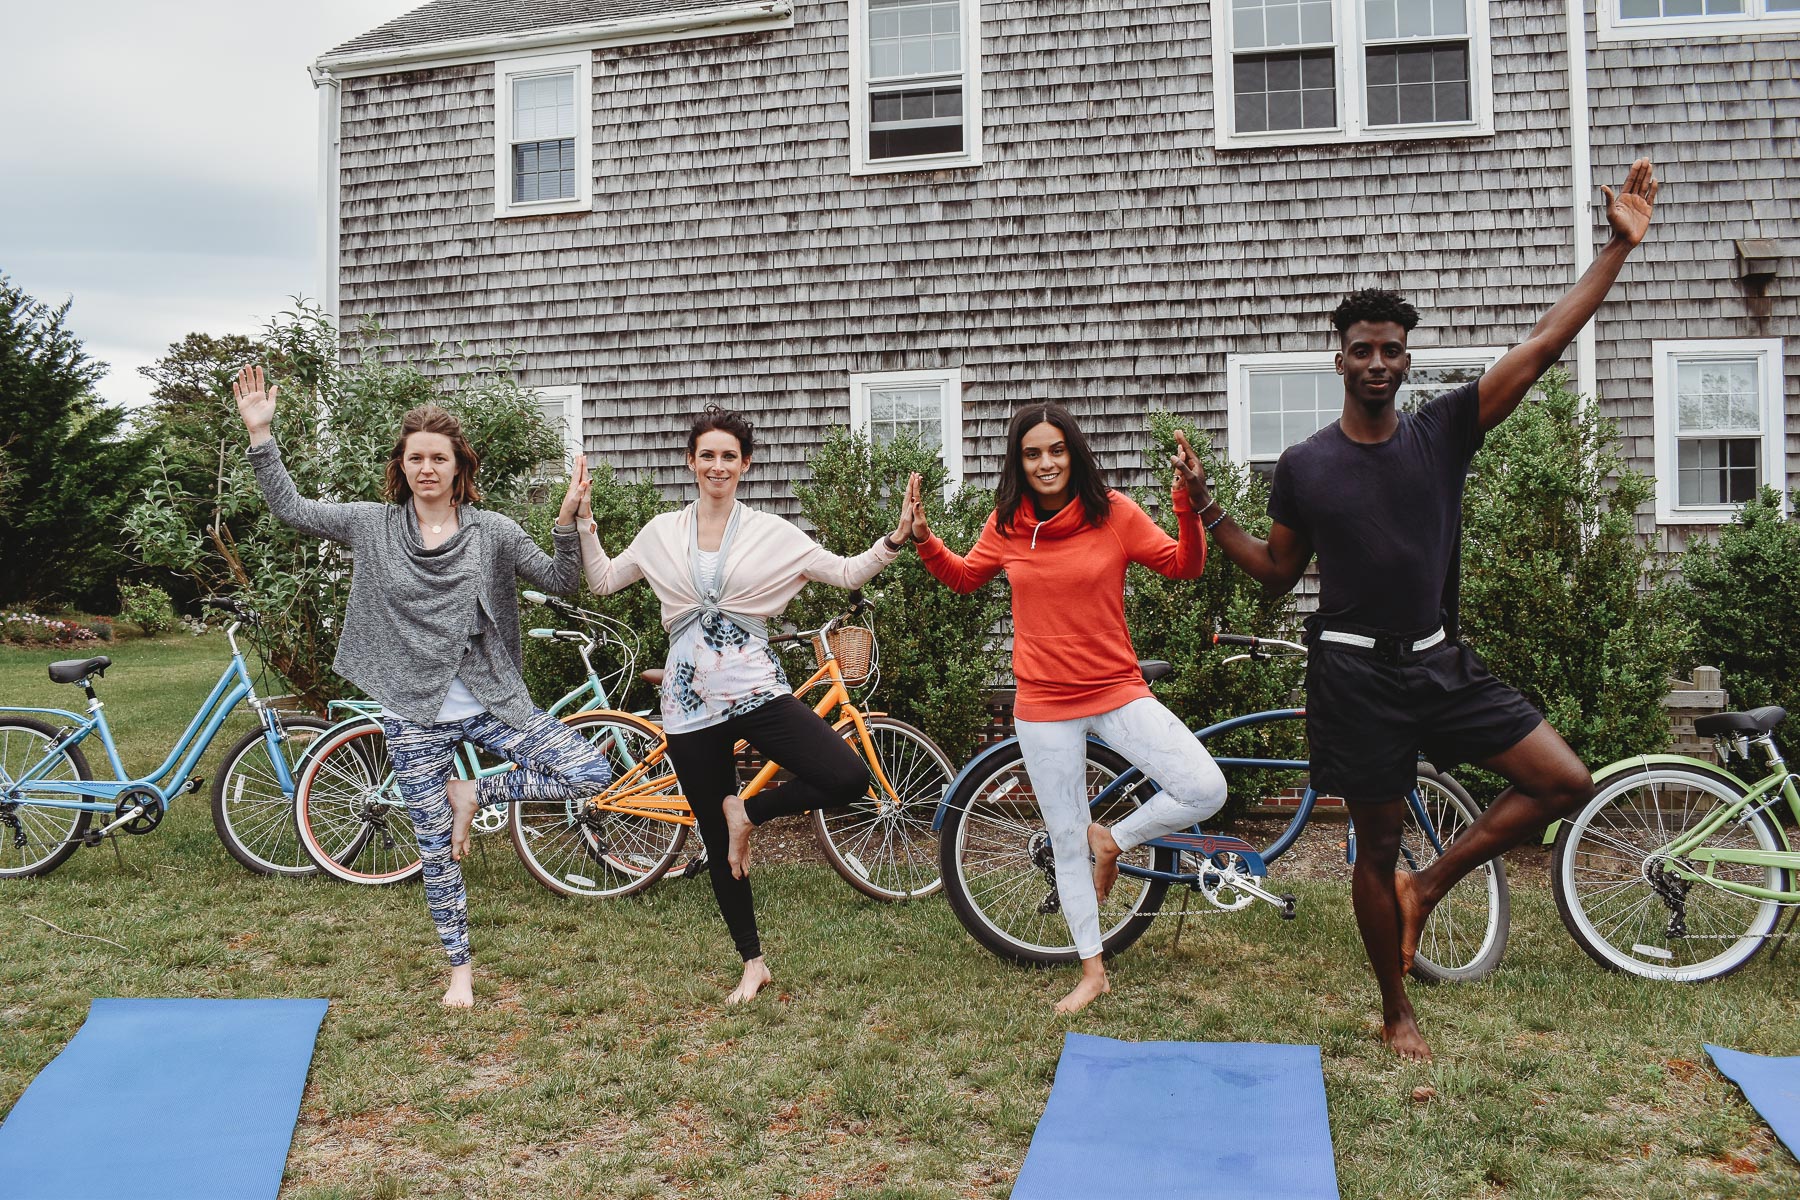 How to Stay Fit, In Balance, and Prevent Injury When You Work From Home | Yoga at the Schwinn Summer House | Nicole Victory Design